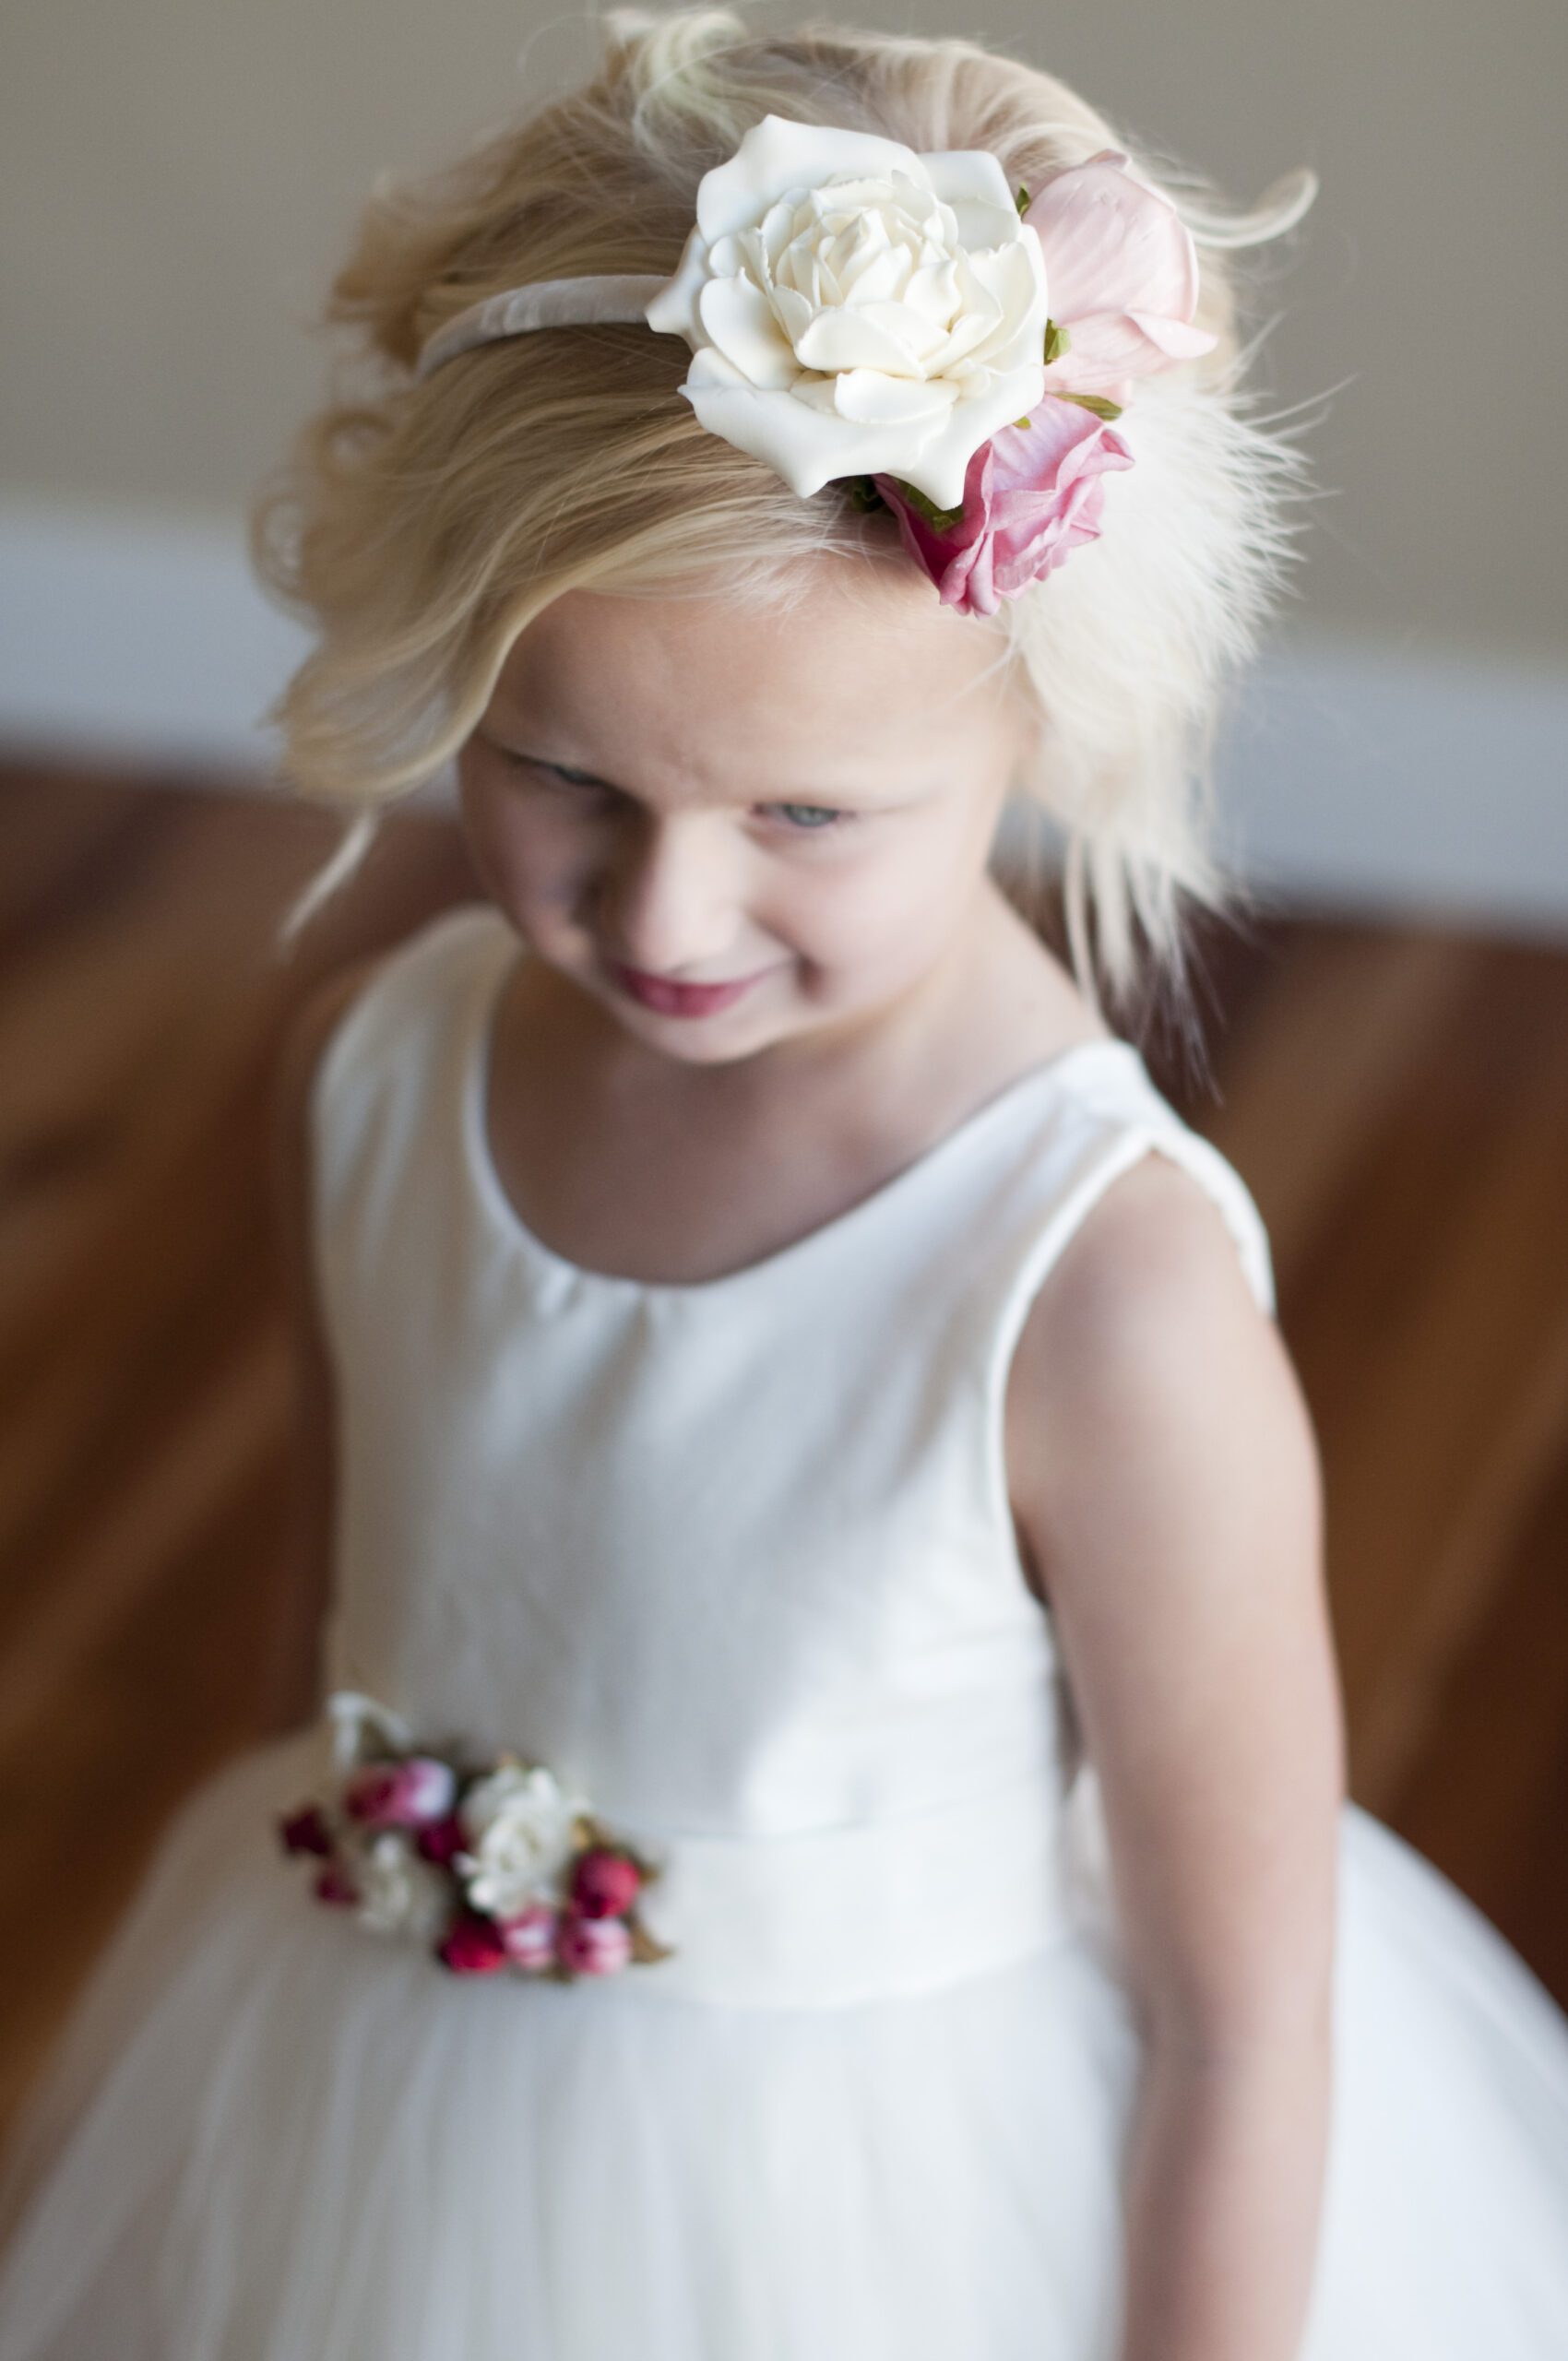 A photo of a flower girl wearing a pink floral headband and an ivory dress